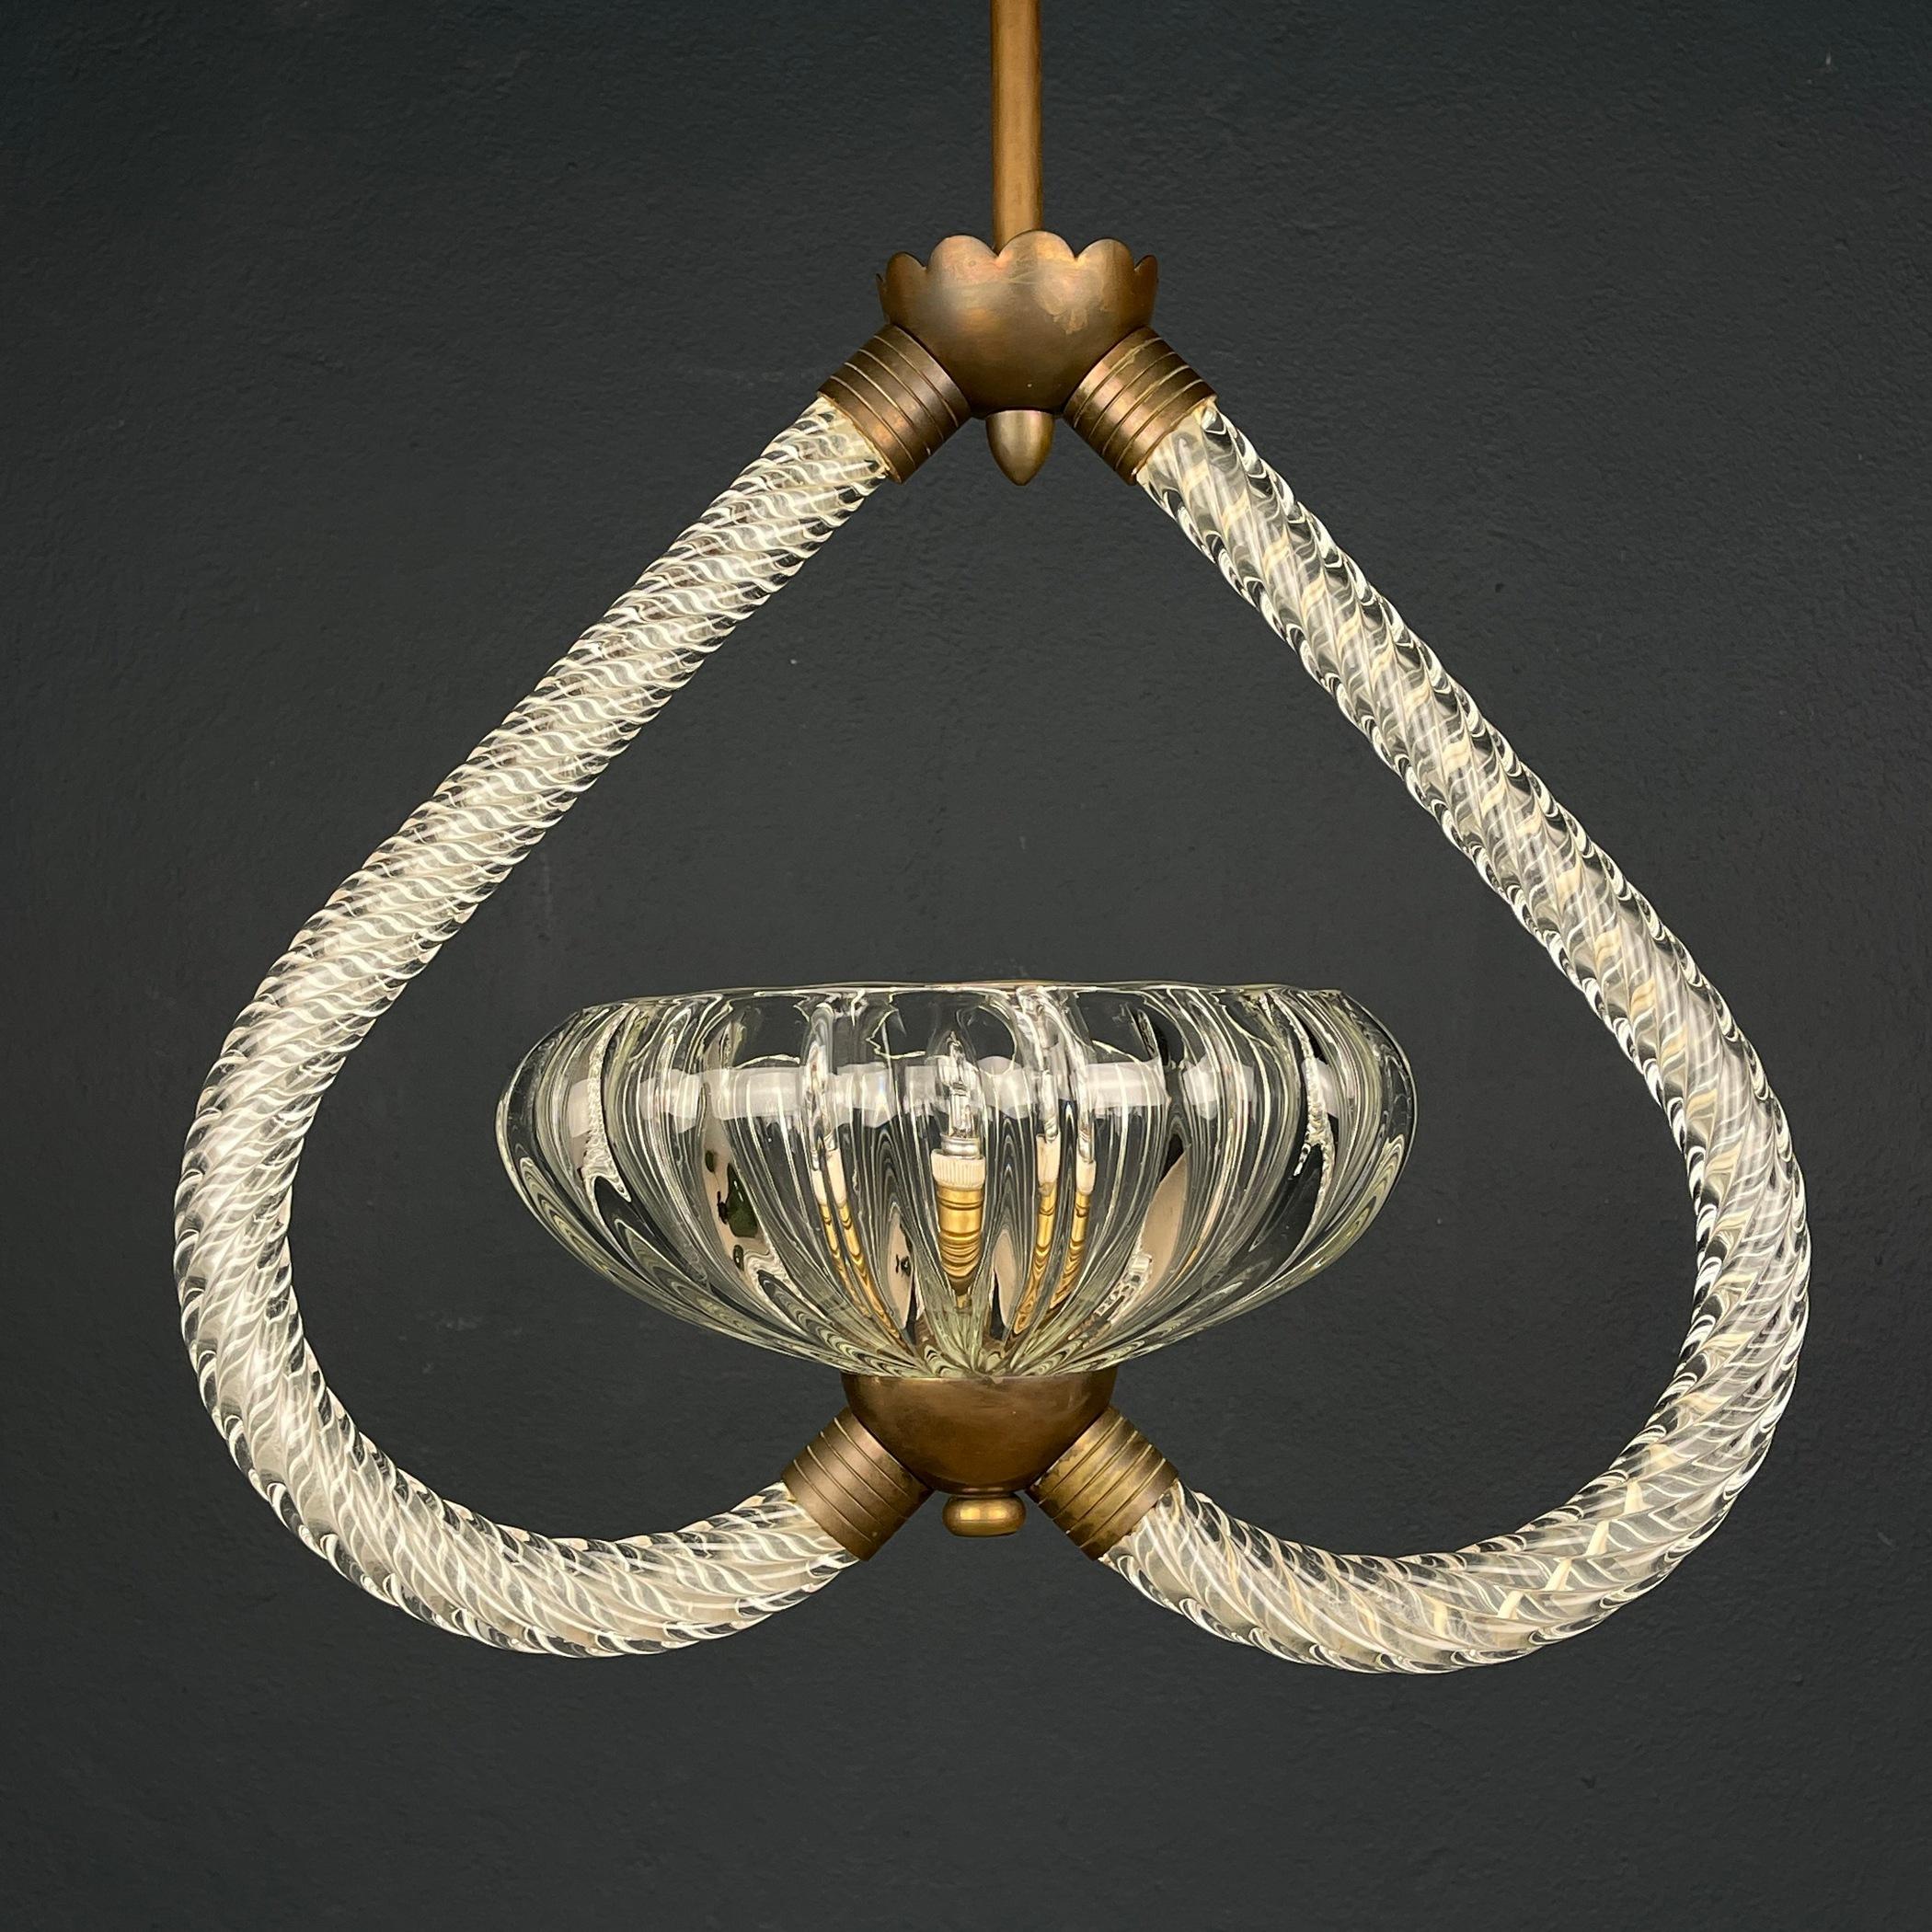 Introduce a touch of timeless elegance with the exquisite Murano Barovier & Toso Chandelier featuring handblown Murano glass suspended from a brass frame. Crafted in Italy during the 1950s, this chandelier is a testament to the artistry and heritage